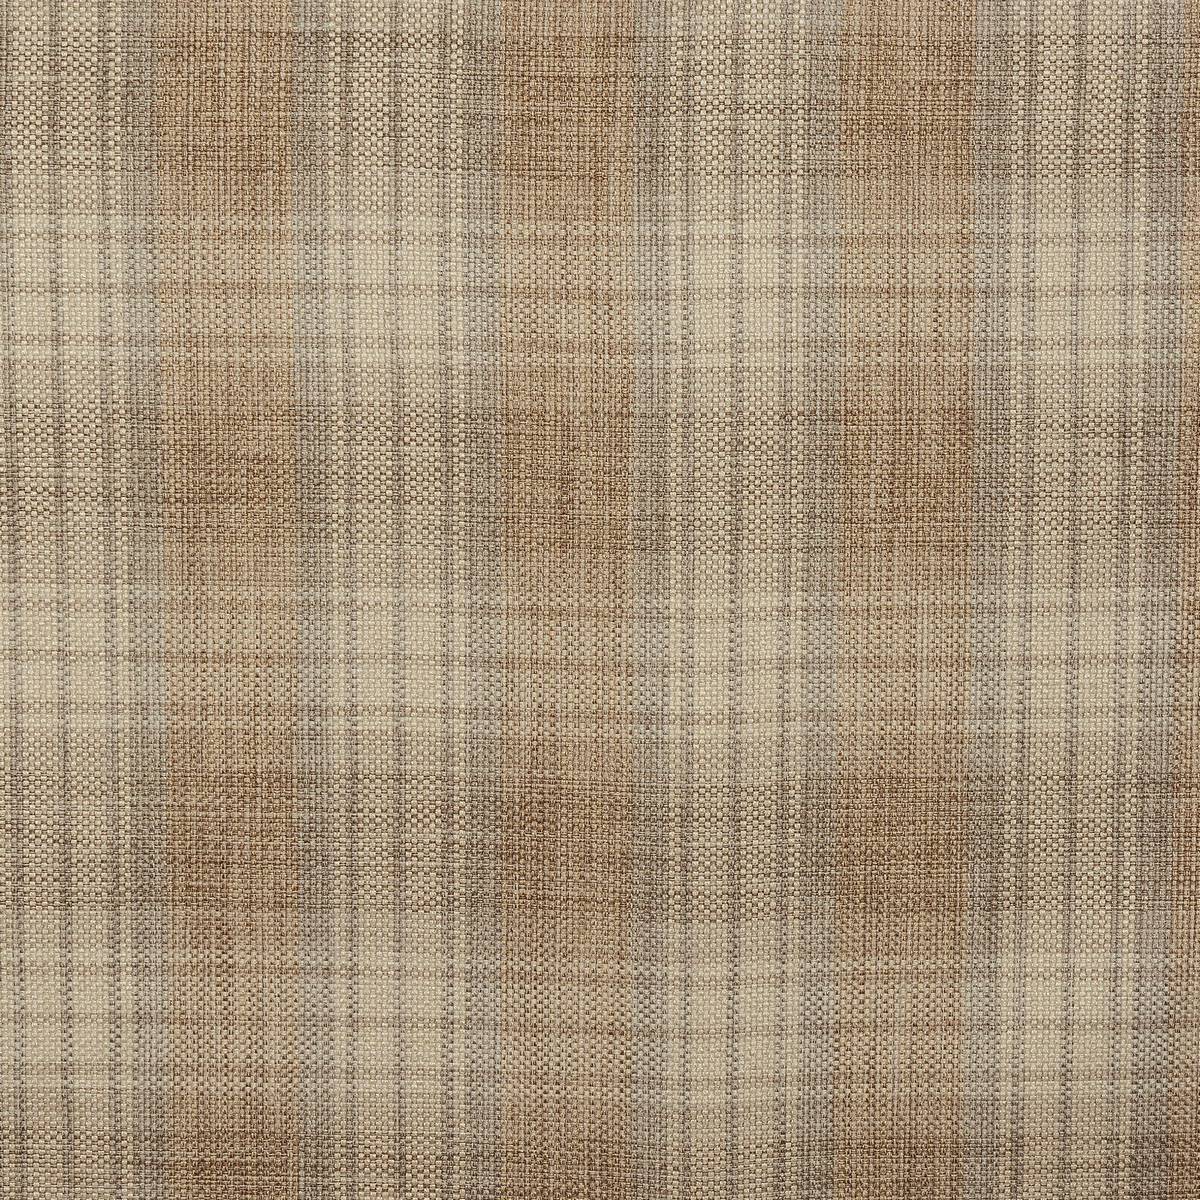 Lomond Natural Fabric by Porter & Stone